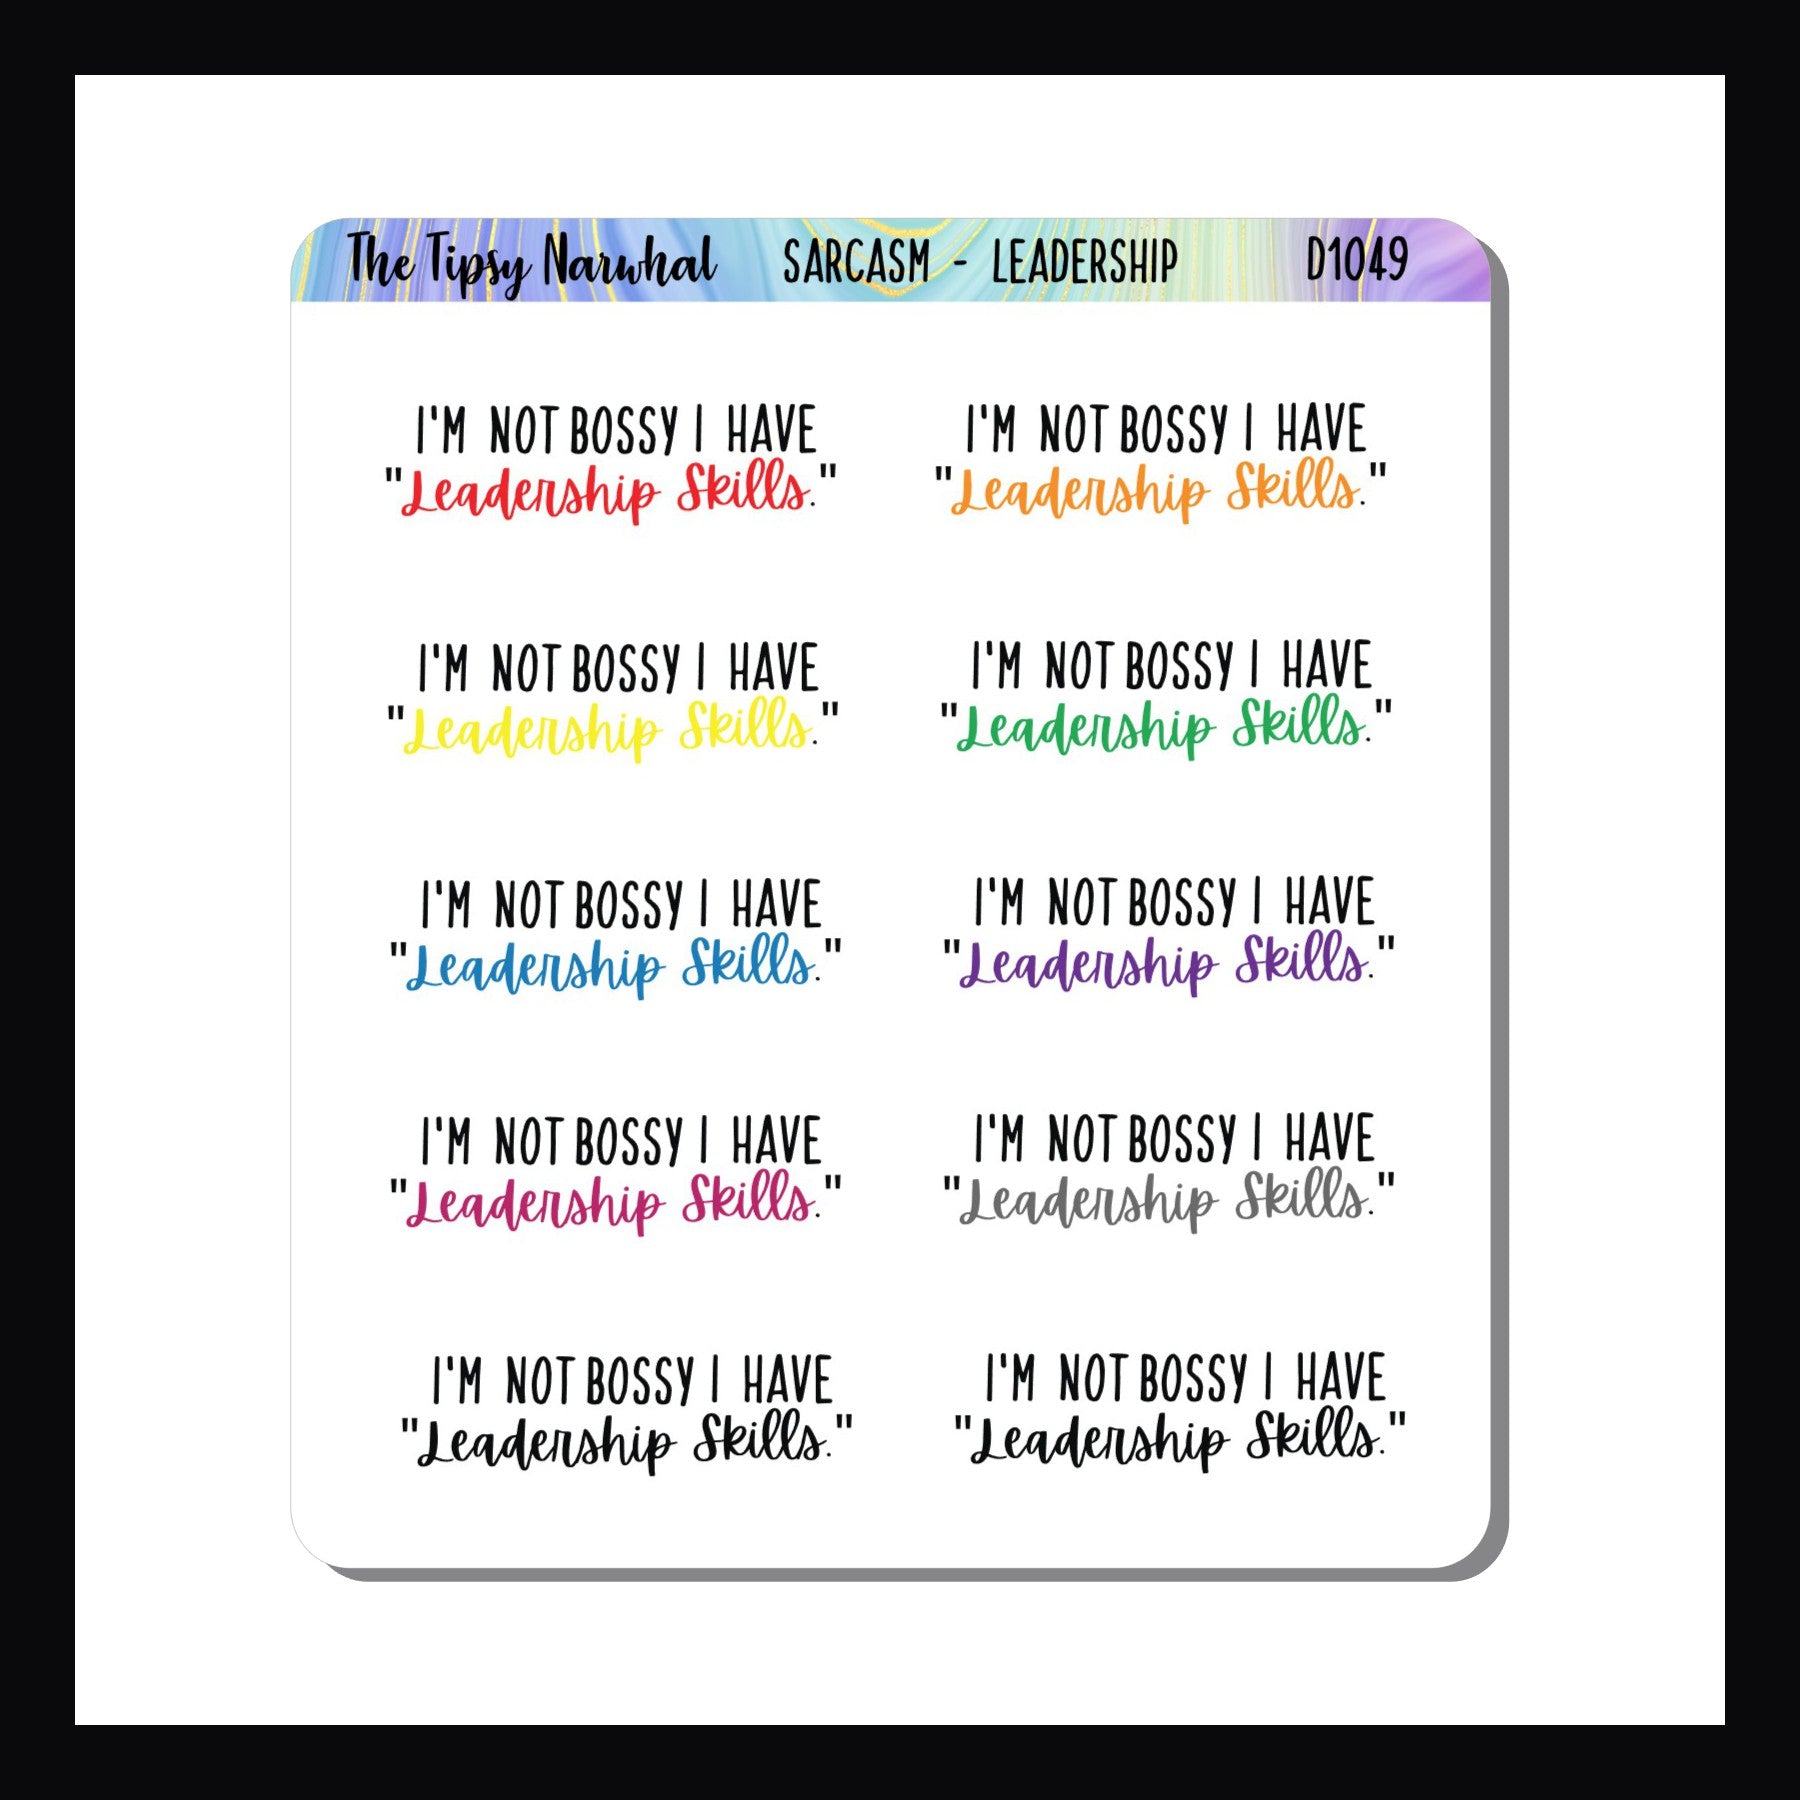 The Digital Leadership Skills Sarcasm Sticker Sheet is a digital and printable version of the Leadership Sarcasm Sticker Sheet.  It features 10 tongue in cheek quotes about leadership skills. 